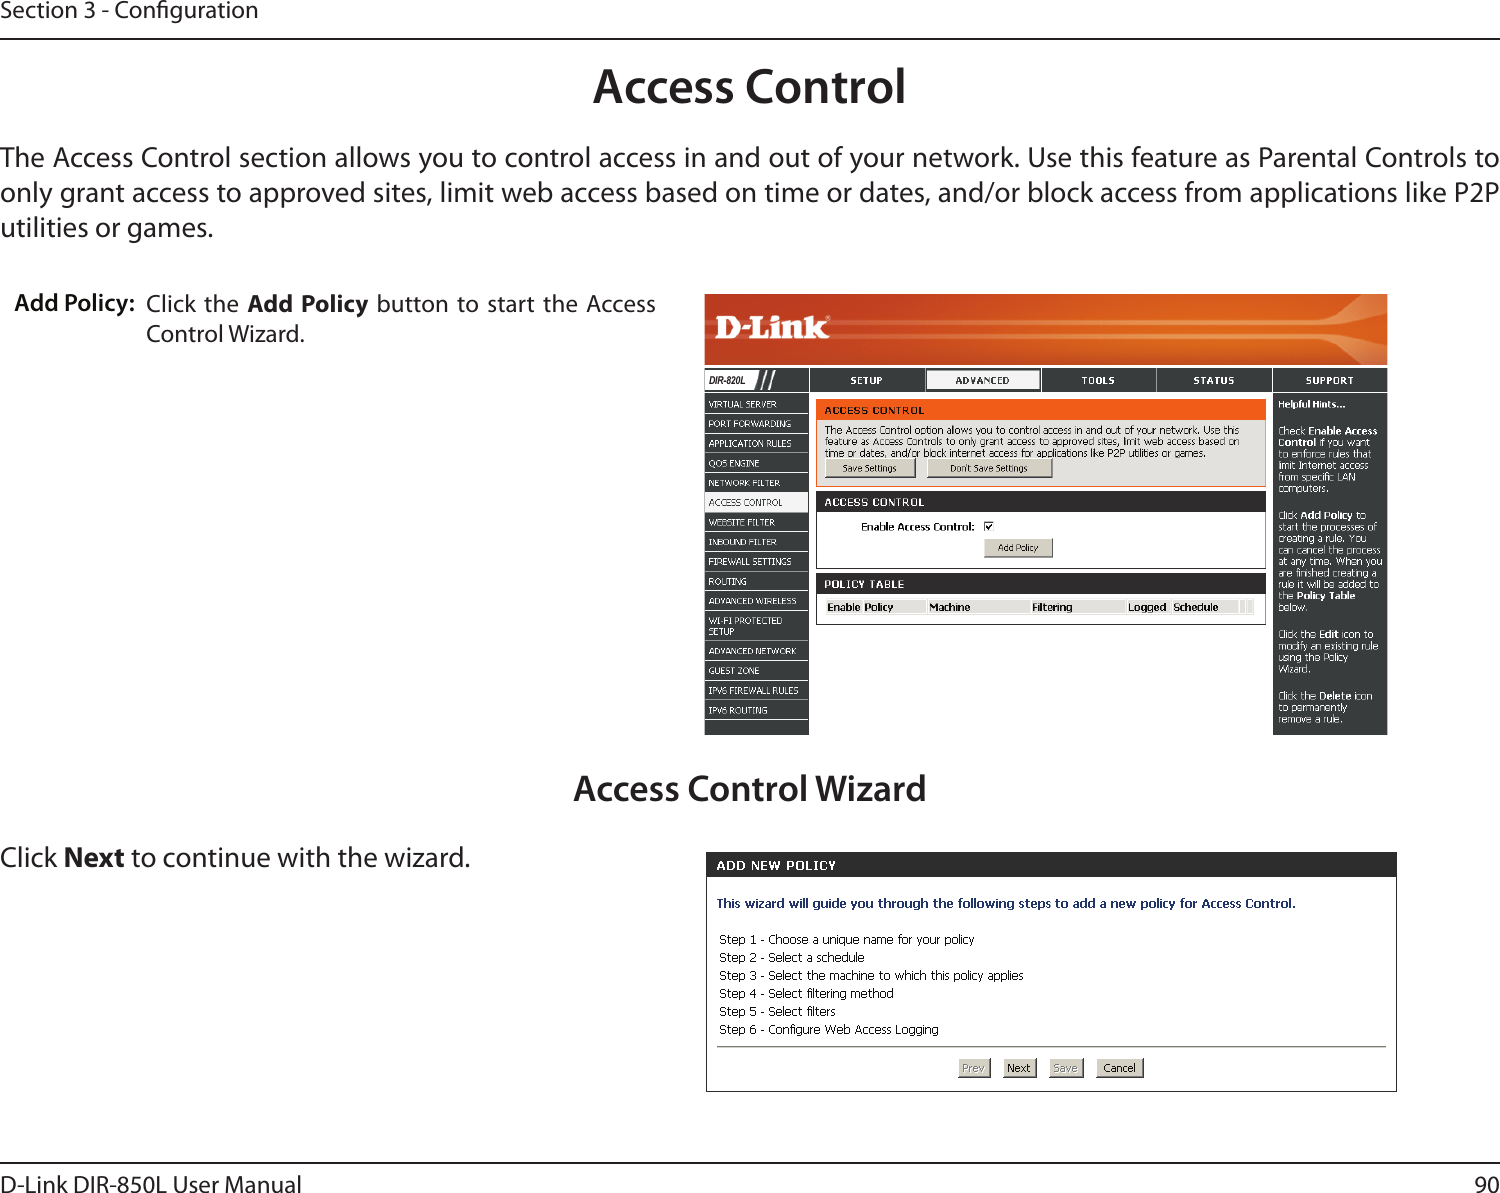 90D-Link DIR-850L User ManualSection 3 - CongurationAccess ControlClick the  Add Policy button to start  the Access Control Wizard. Add Policy:The Access Control section allows you to control access in and out of your network. Use this feature as Parental Controls to only grant access to approved sites, limit web access based on time or dates, and/or block access from applications like P2P utilities or games.Click Next to continue with the wizard.Access Control WizardDIR-820L